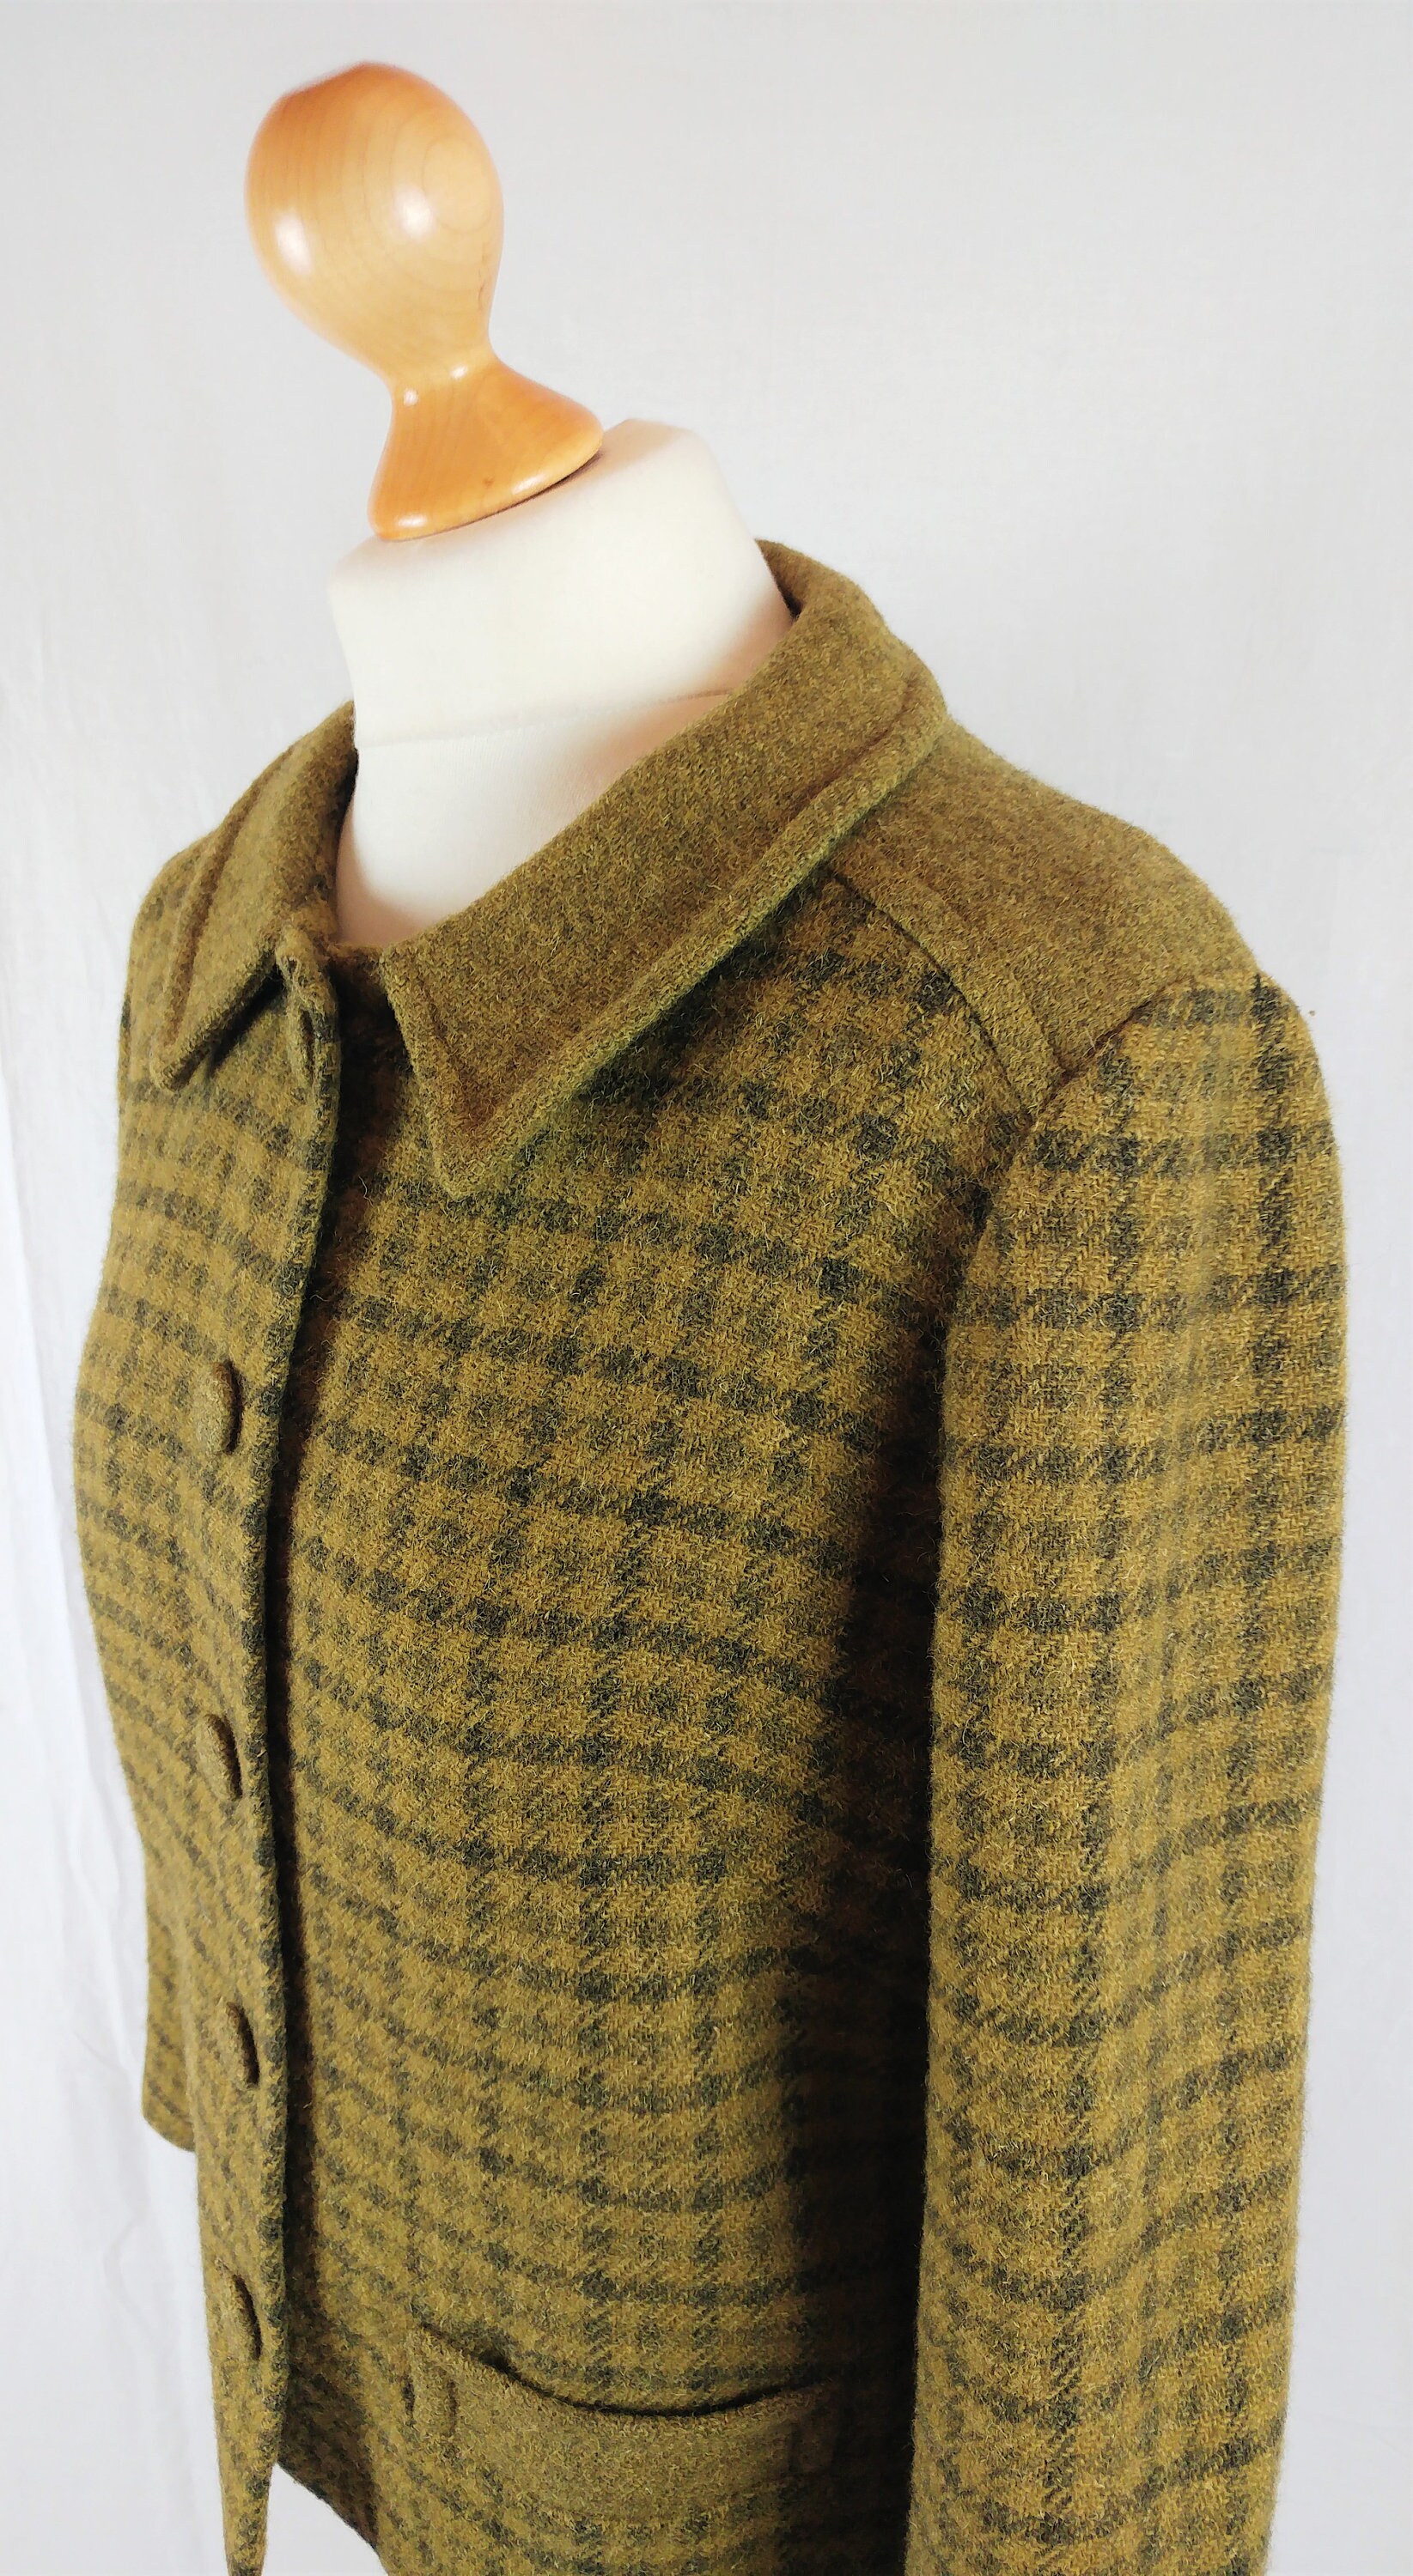 Finnish Vintage Rissanen 1960s Olive Green Cropped Wool Jacket | Etsy